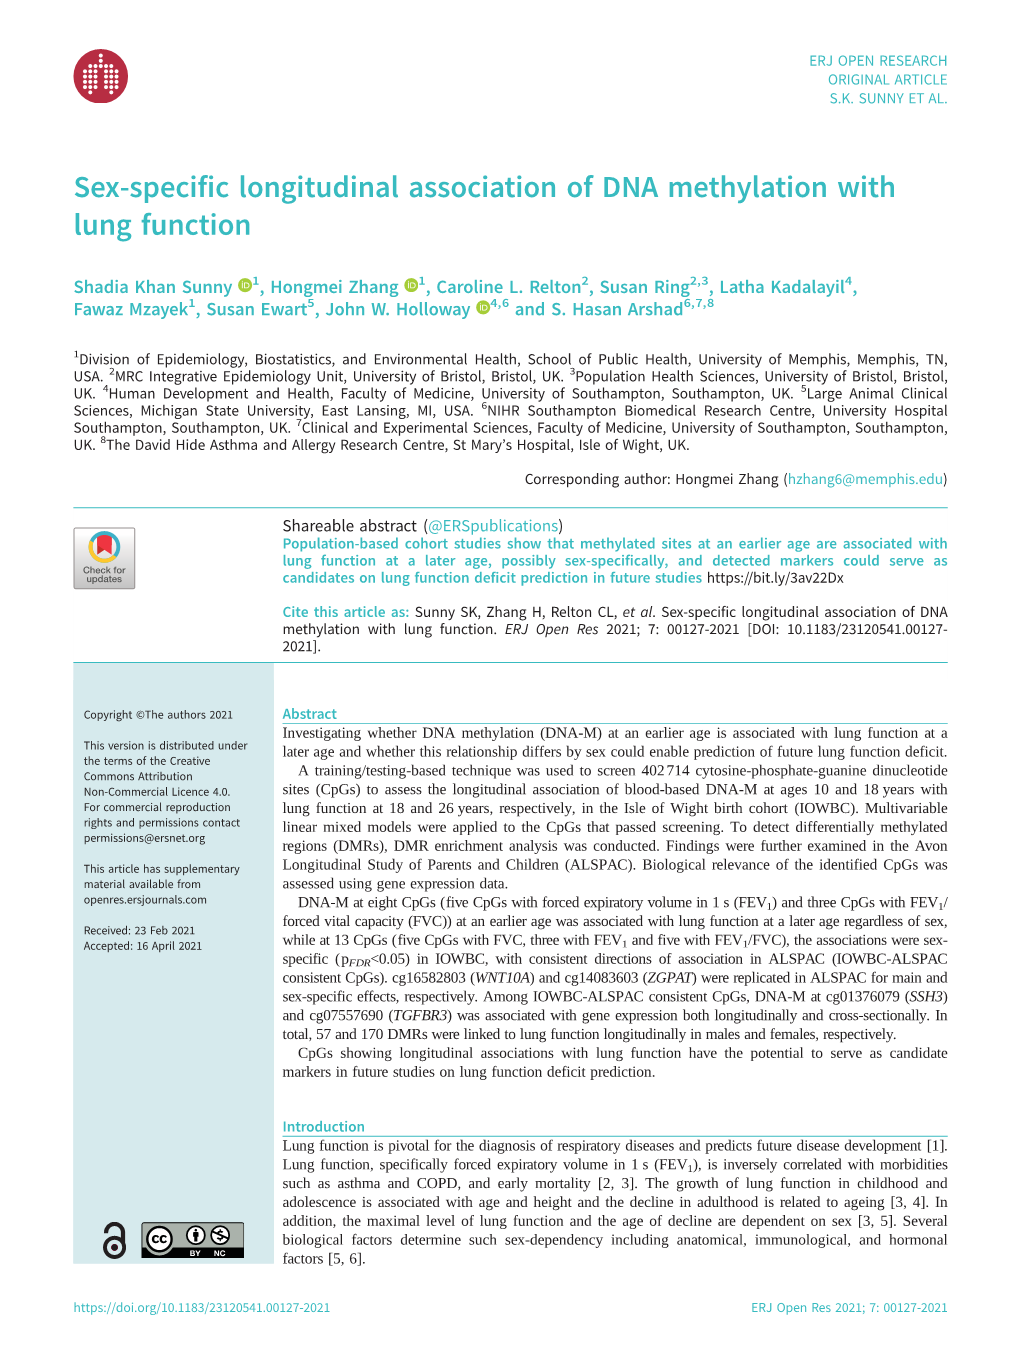 Sex-Specific Longitudinal Association of DNA Methylation with Lung Function